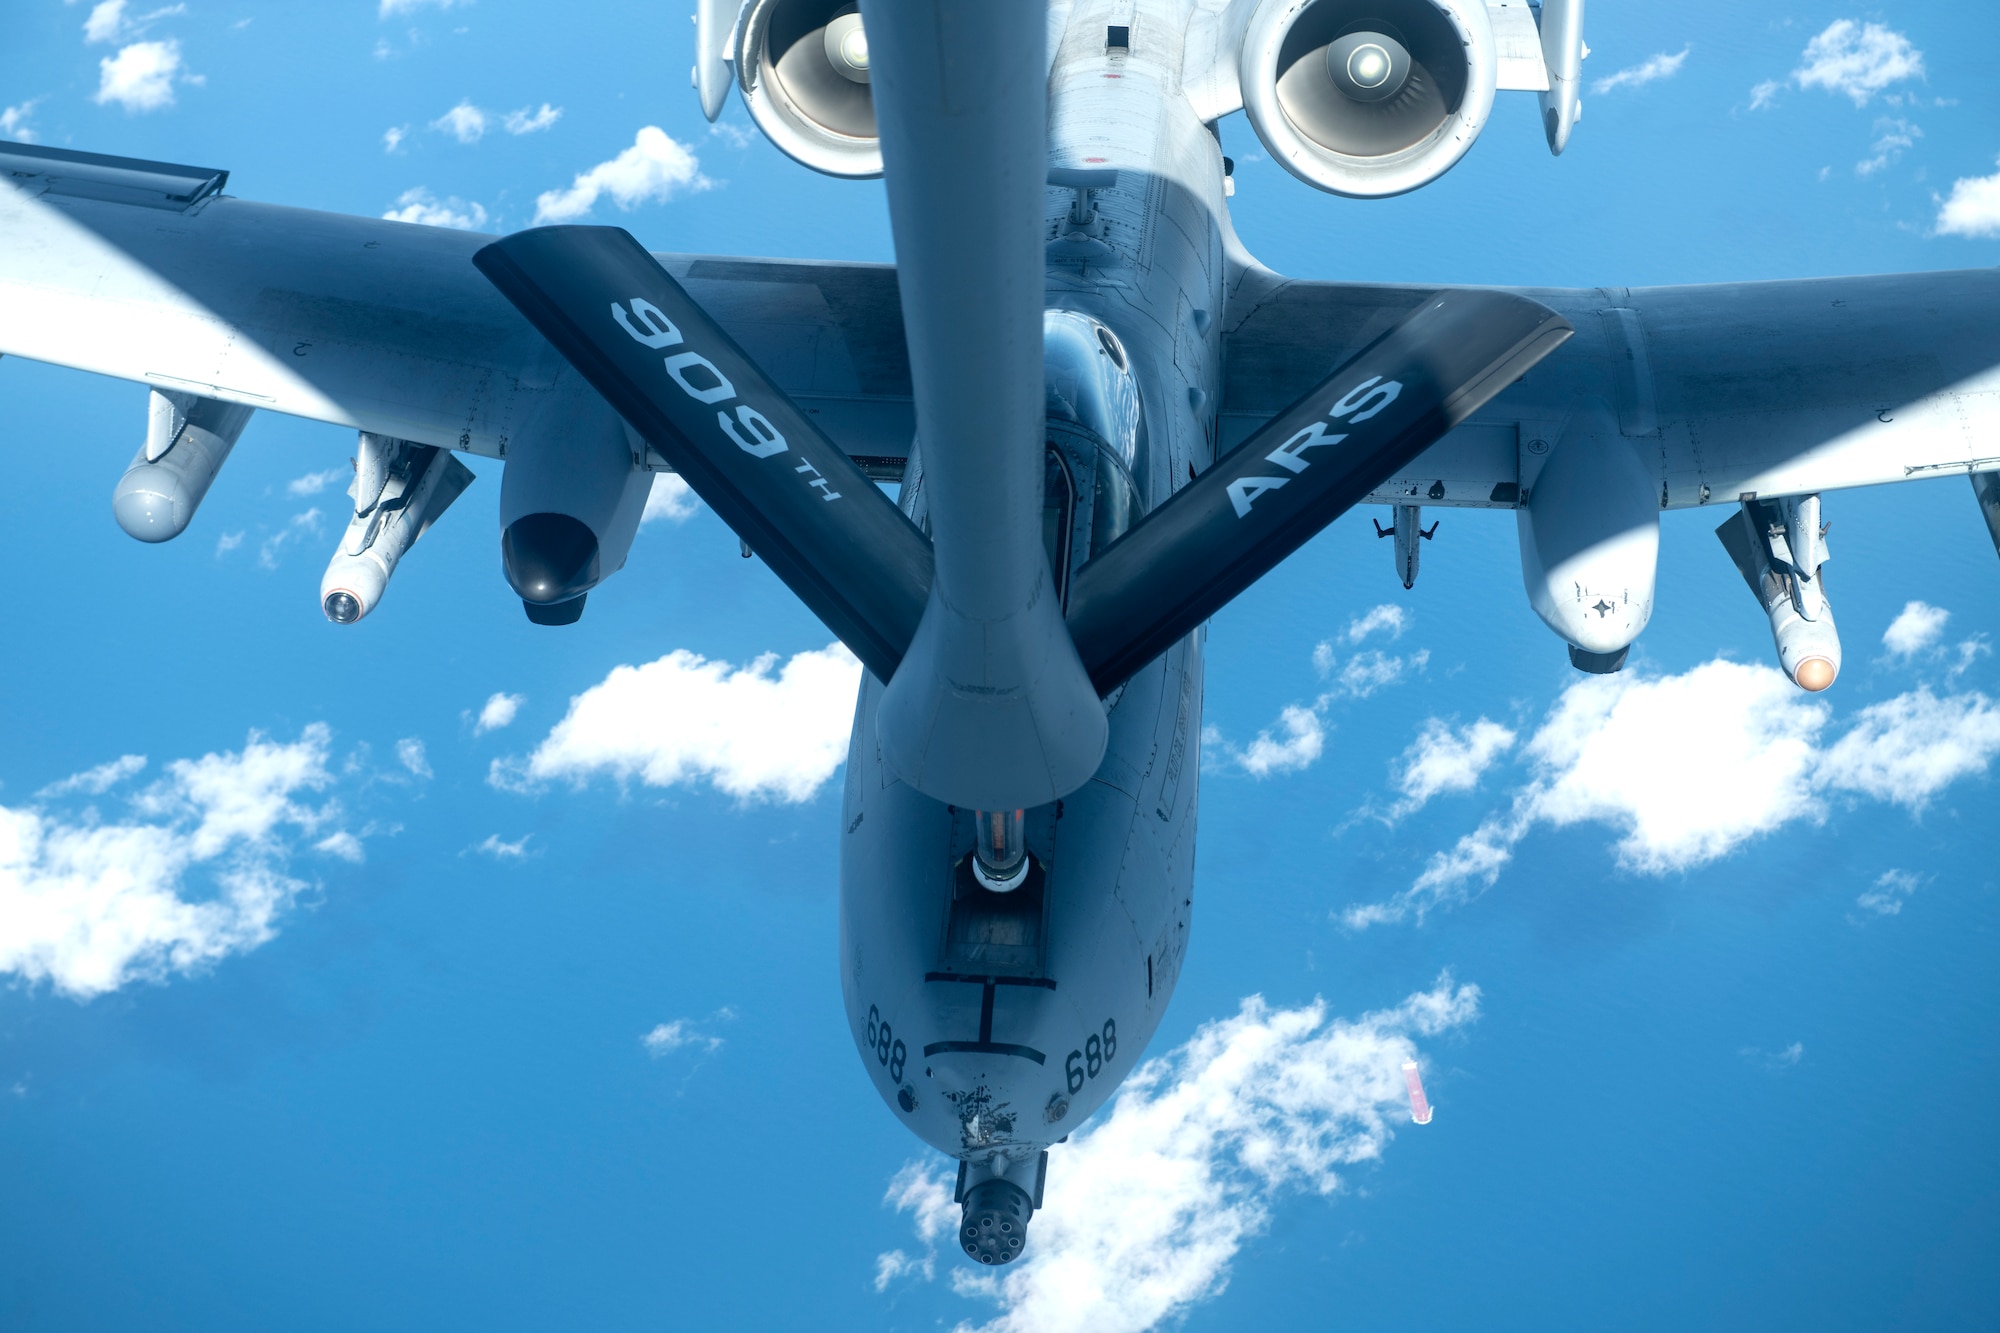 A U.S. Air Force A-10 Thunderbolt II from the 51st Fighter Squadron connects with a 909th Refueling Squadron KC-135 Stratotanker for aerial refueling over the Pacific Ocean Oct. 14, 2021. The 51st FW conducts routine training exercises to maintain the readiness needed to ensure the continued defense of Osan Air Base and the Republic of Korea. (U.S. Air Force photo by Senior Airman Jessi Monte)